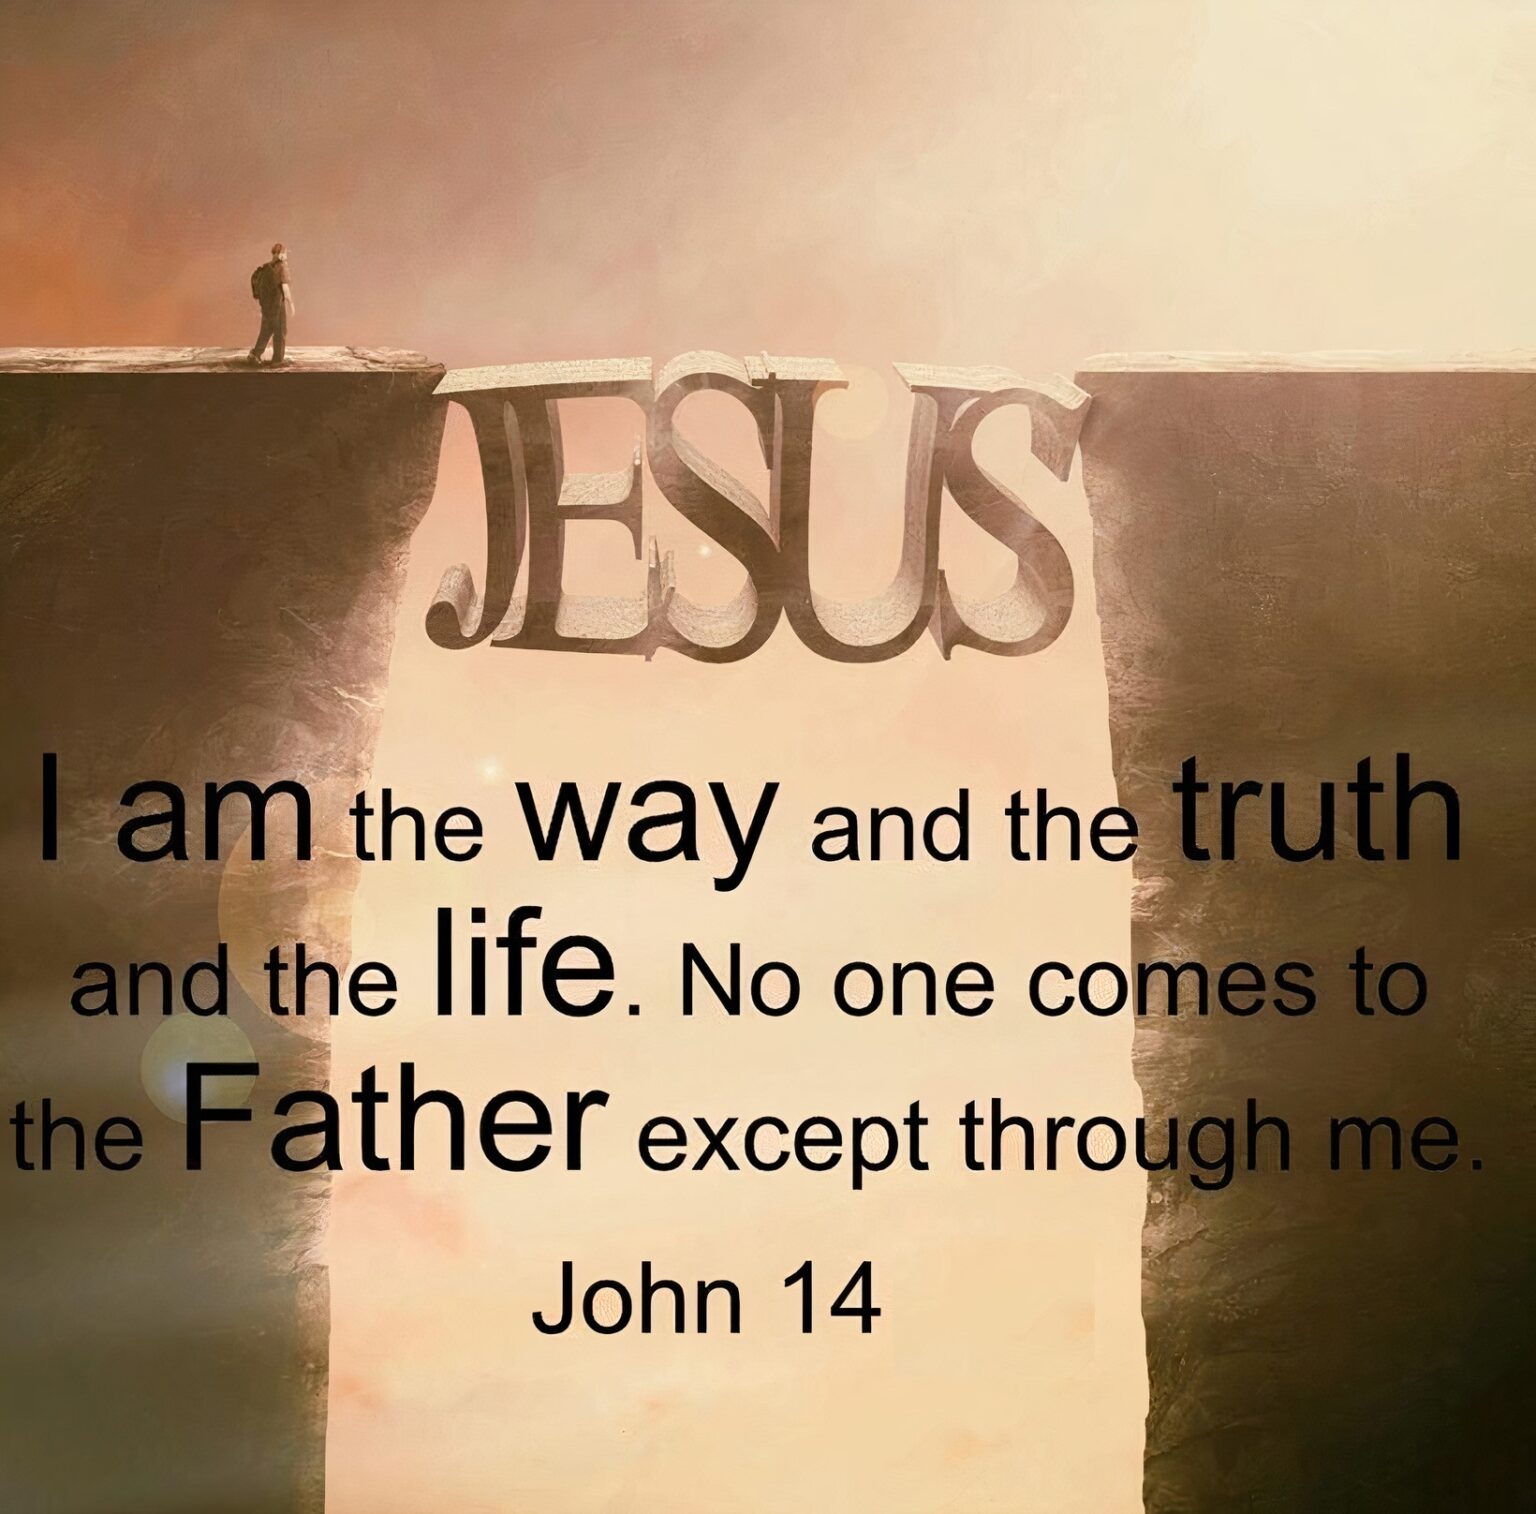 John 14 (Listen to, Dramatized or Read) - GNT - Uplifting Scriptures